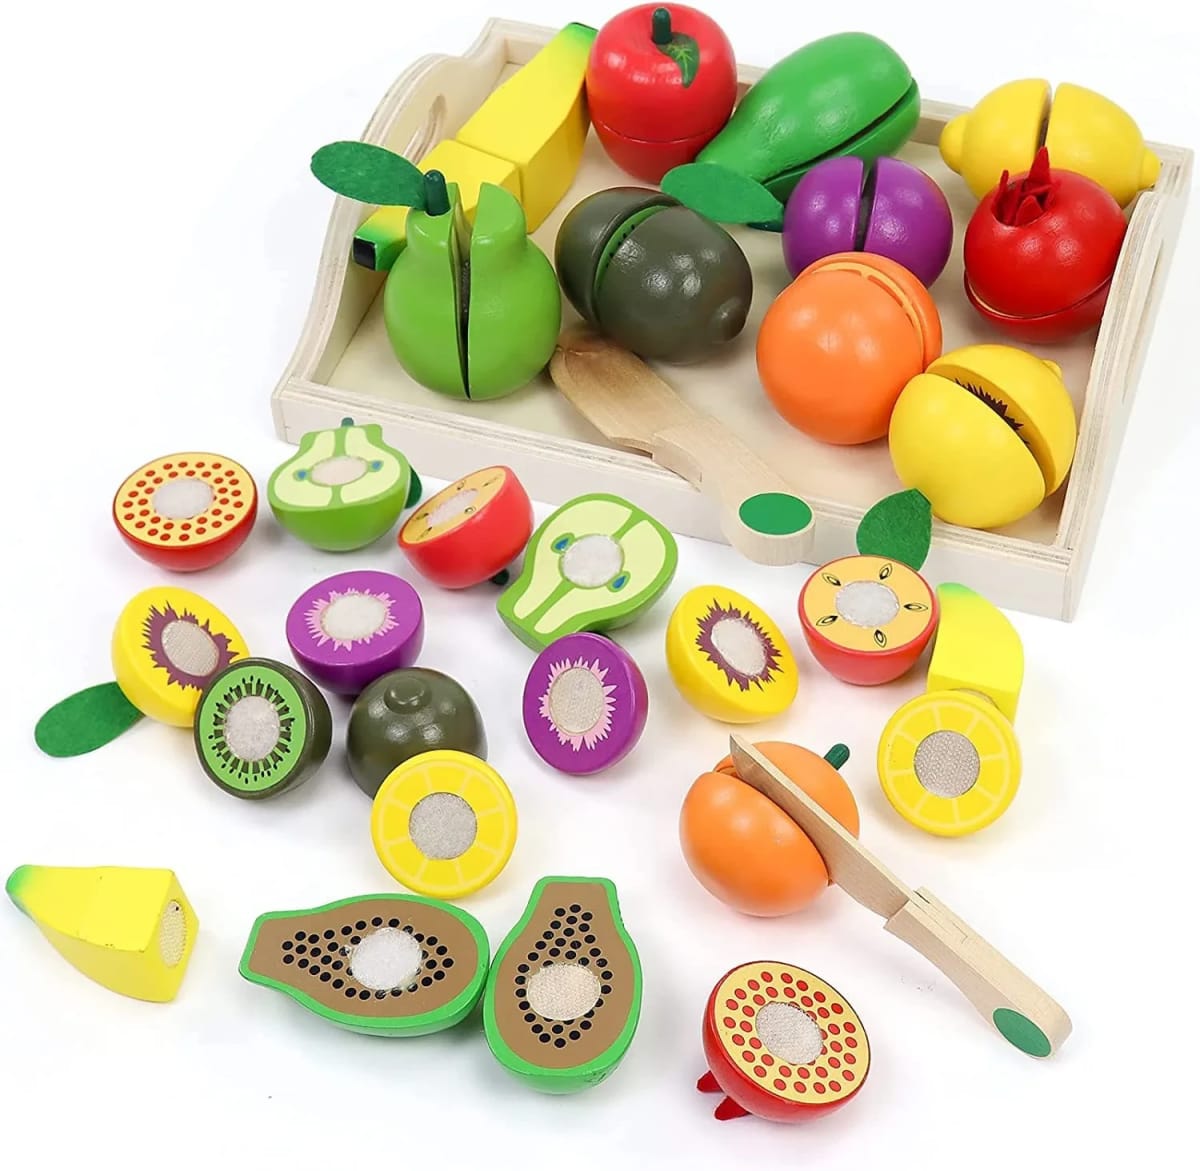 Wooden Toys Play Food Sets for Kids Kitchen Accessories Cutting Montessori Toys